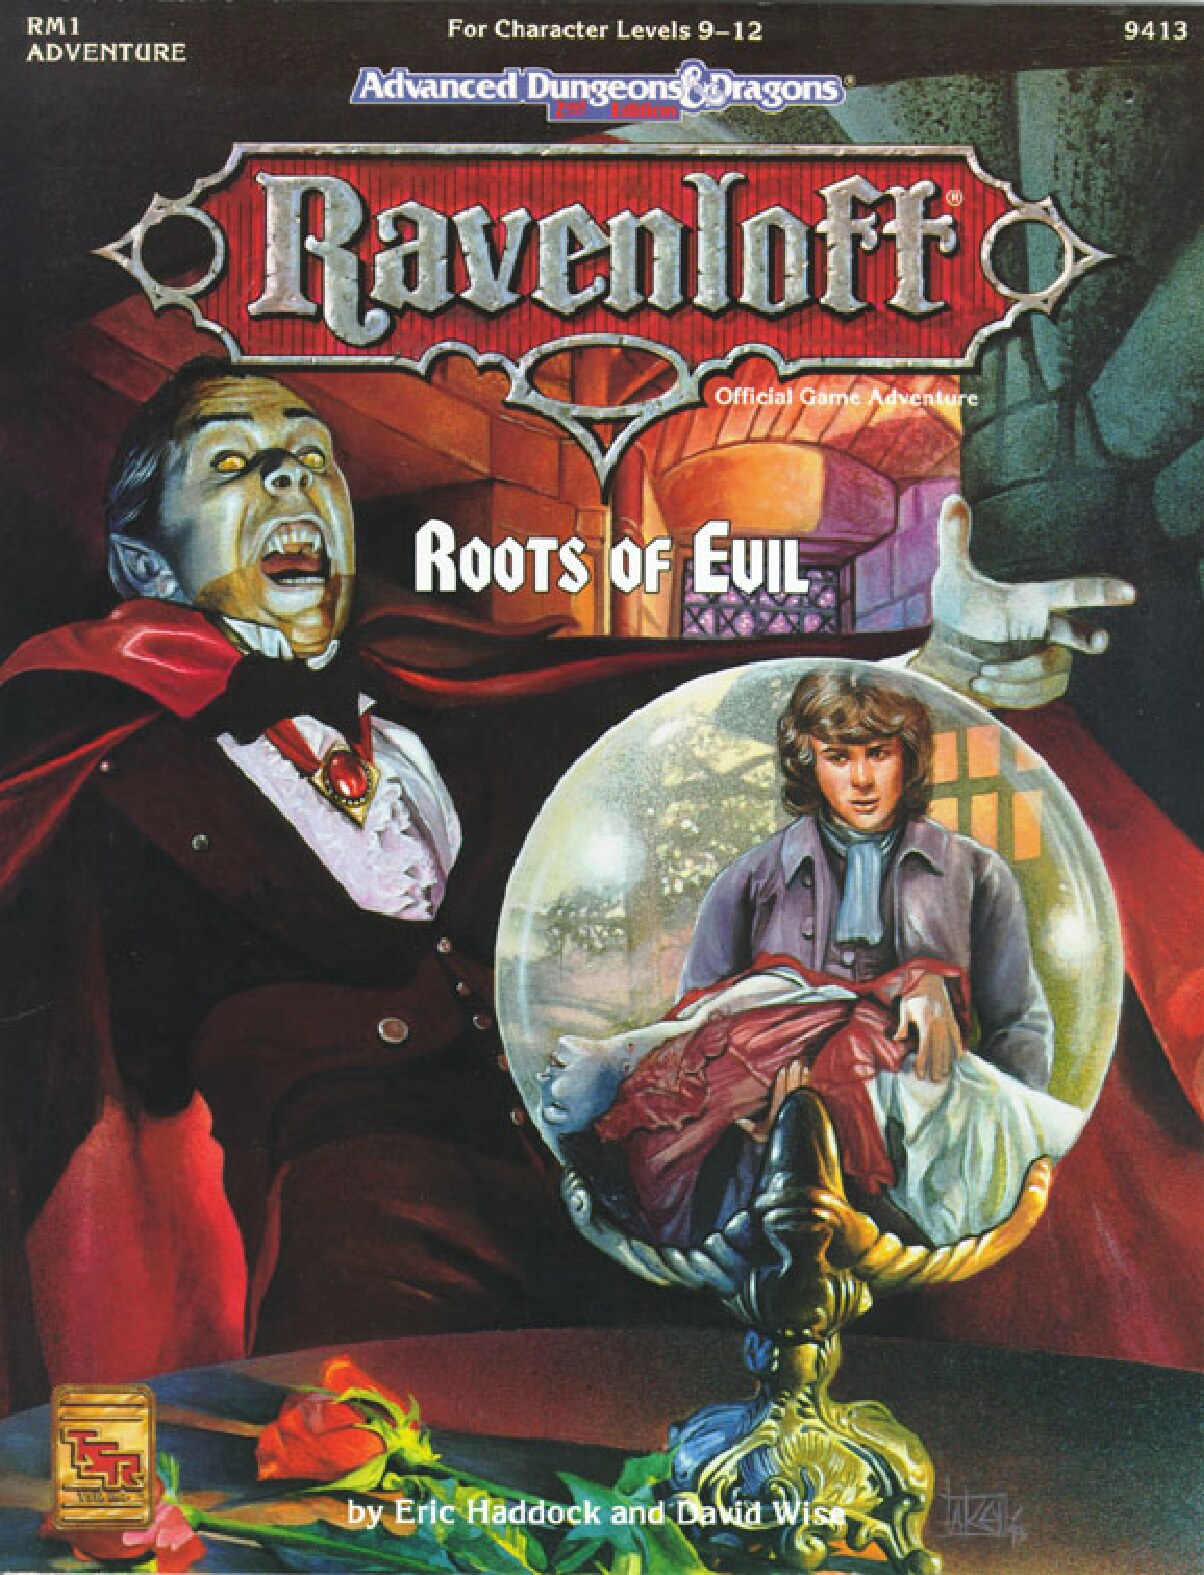 rm1 - Roots of Evil